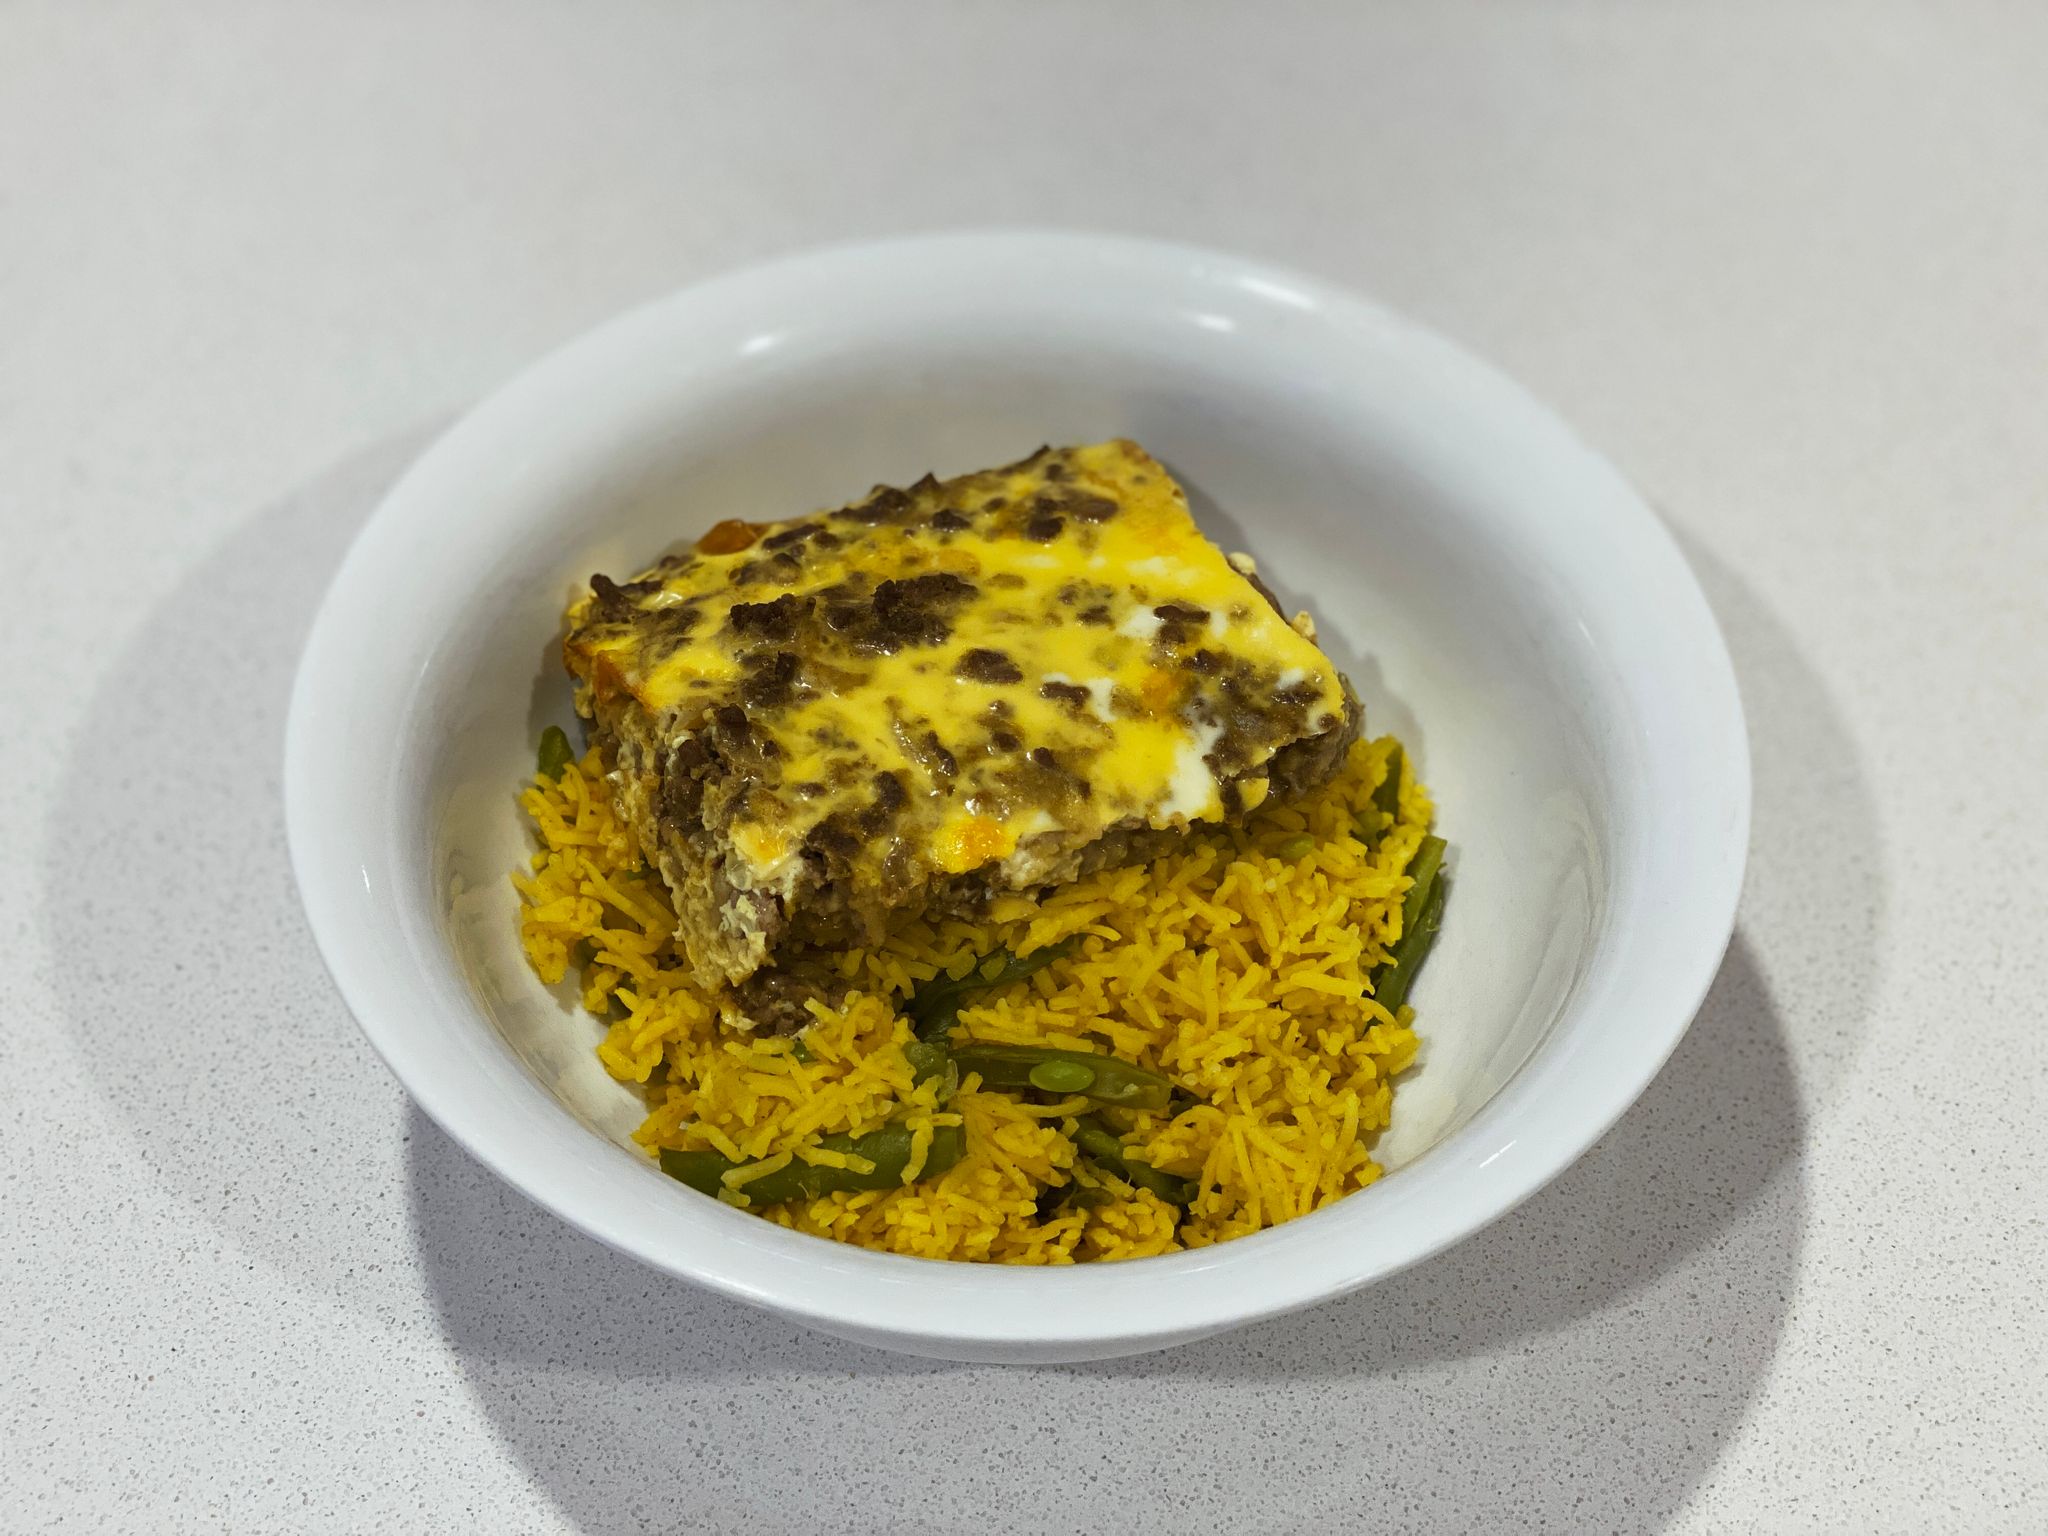 A photo of a quarter of the bobotie sitting in a white bowl on top of yellow rice with green beans in it.